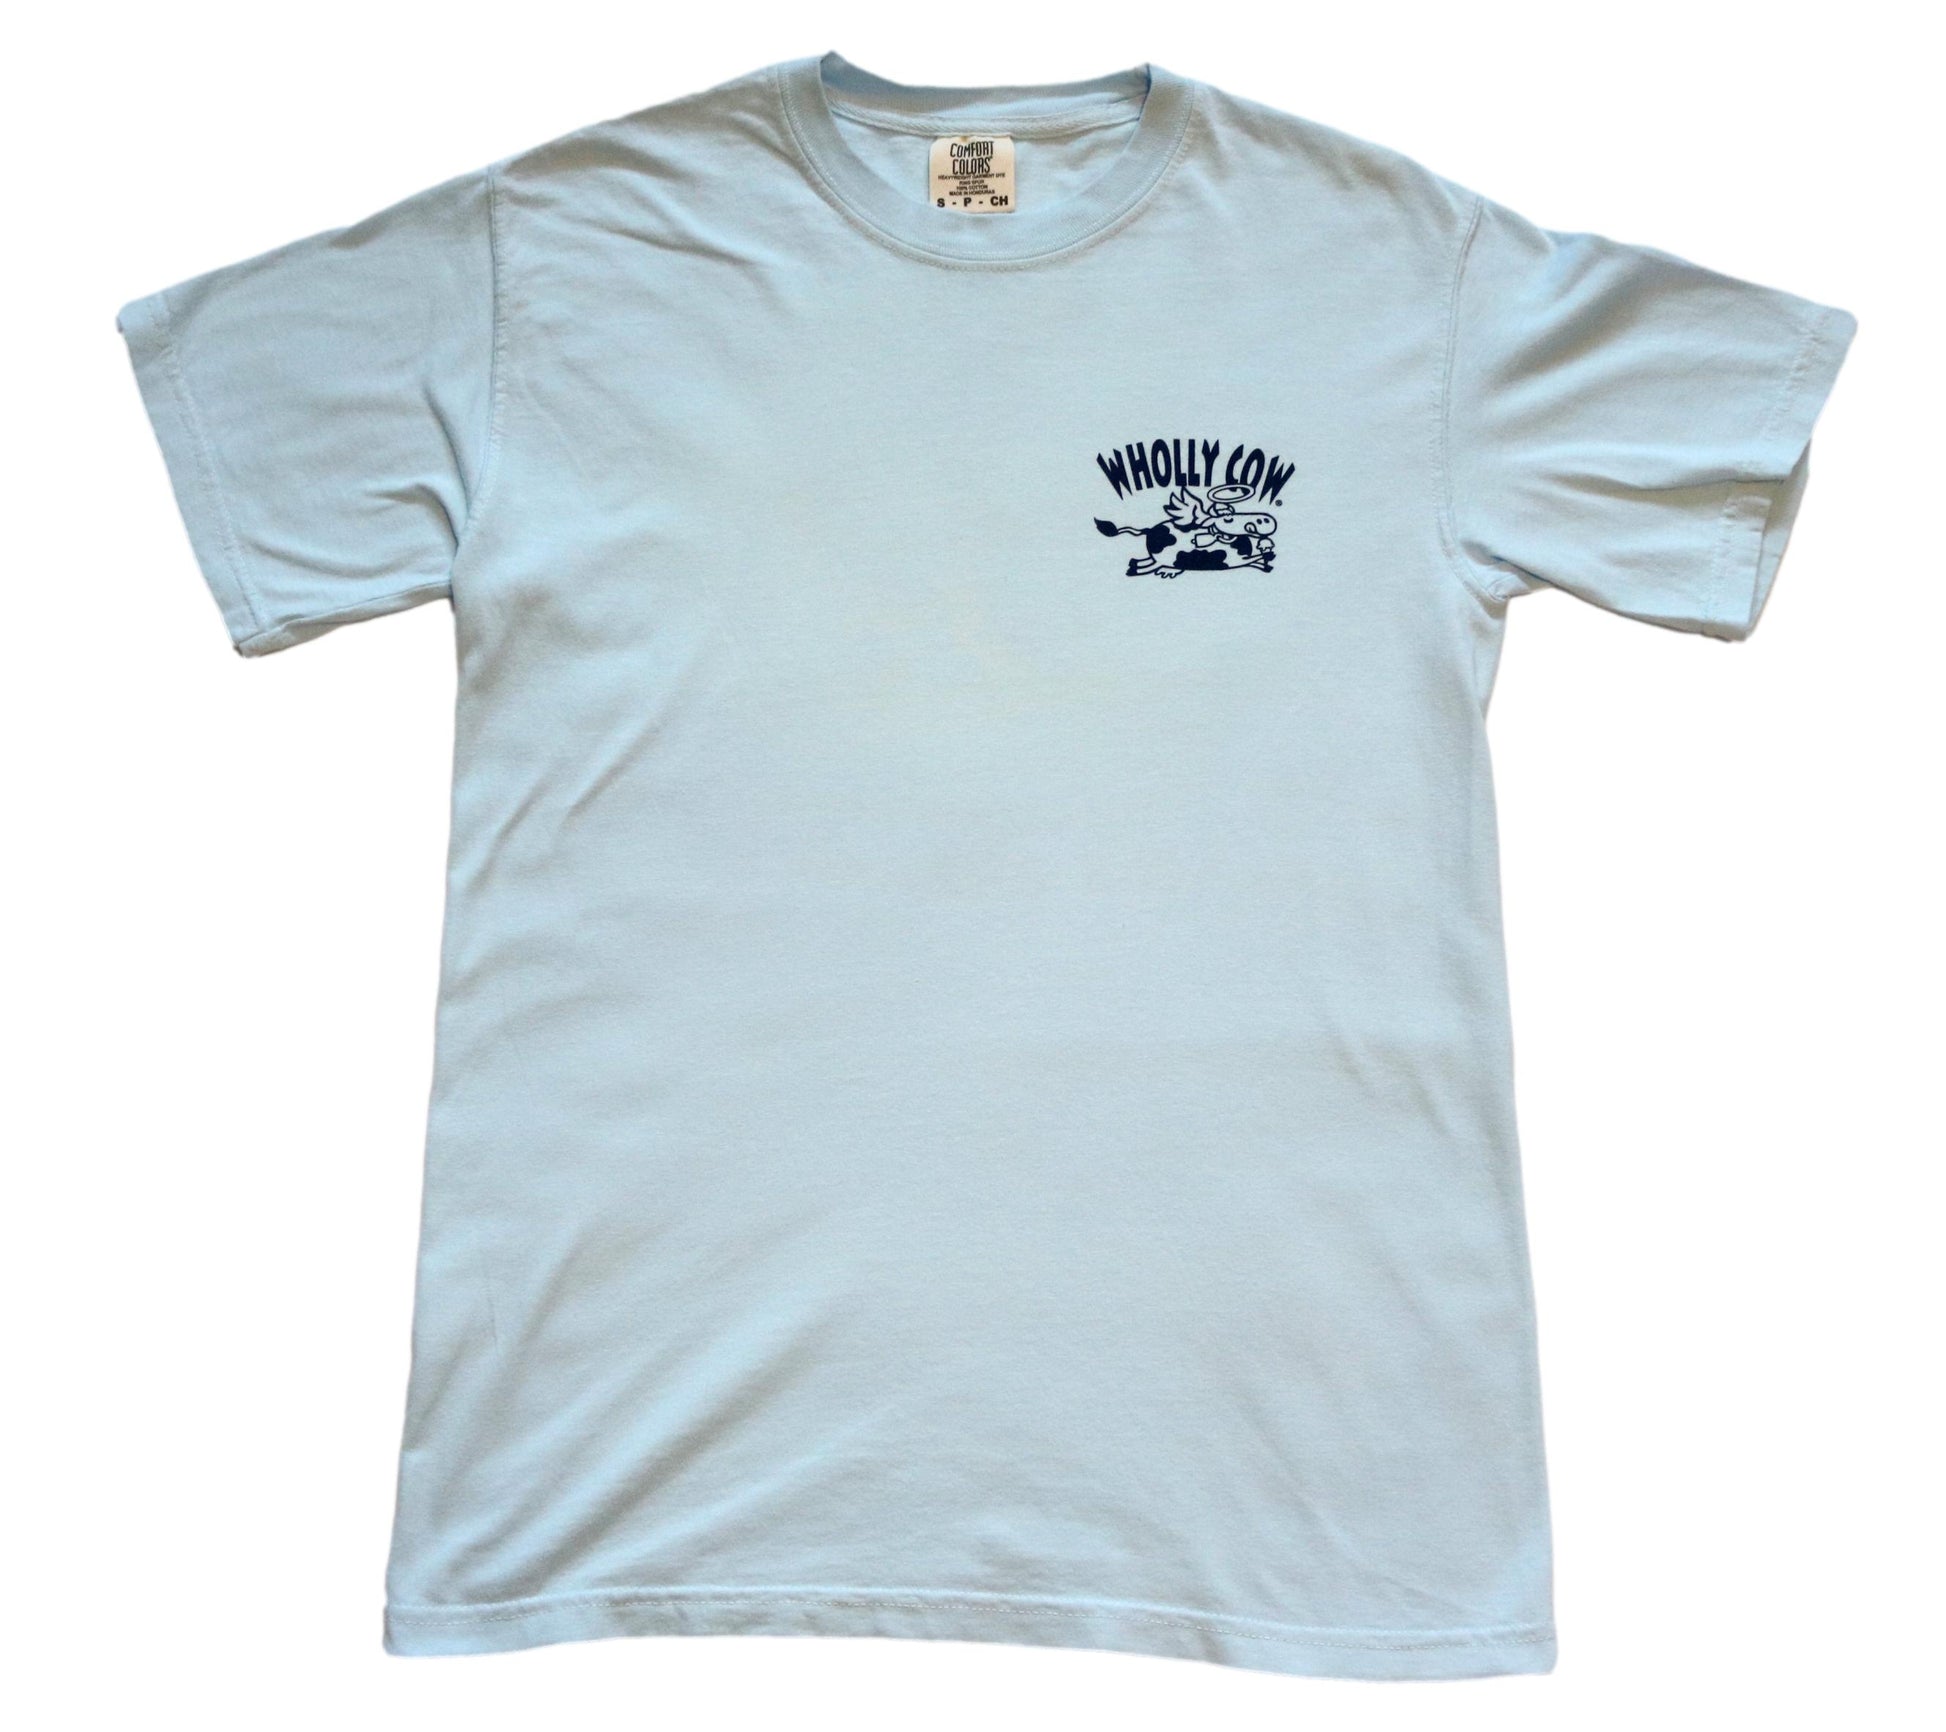 Wholly Cow Ice Cream Shirt Blue